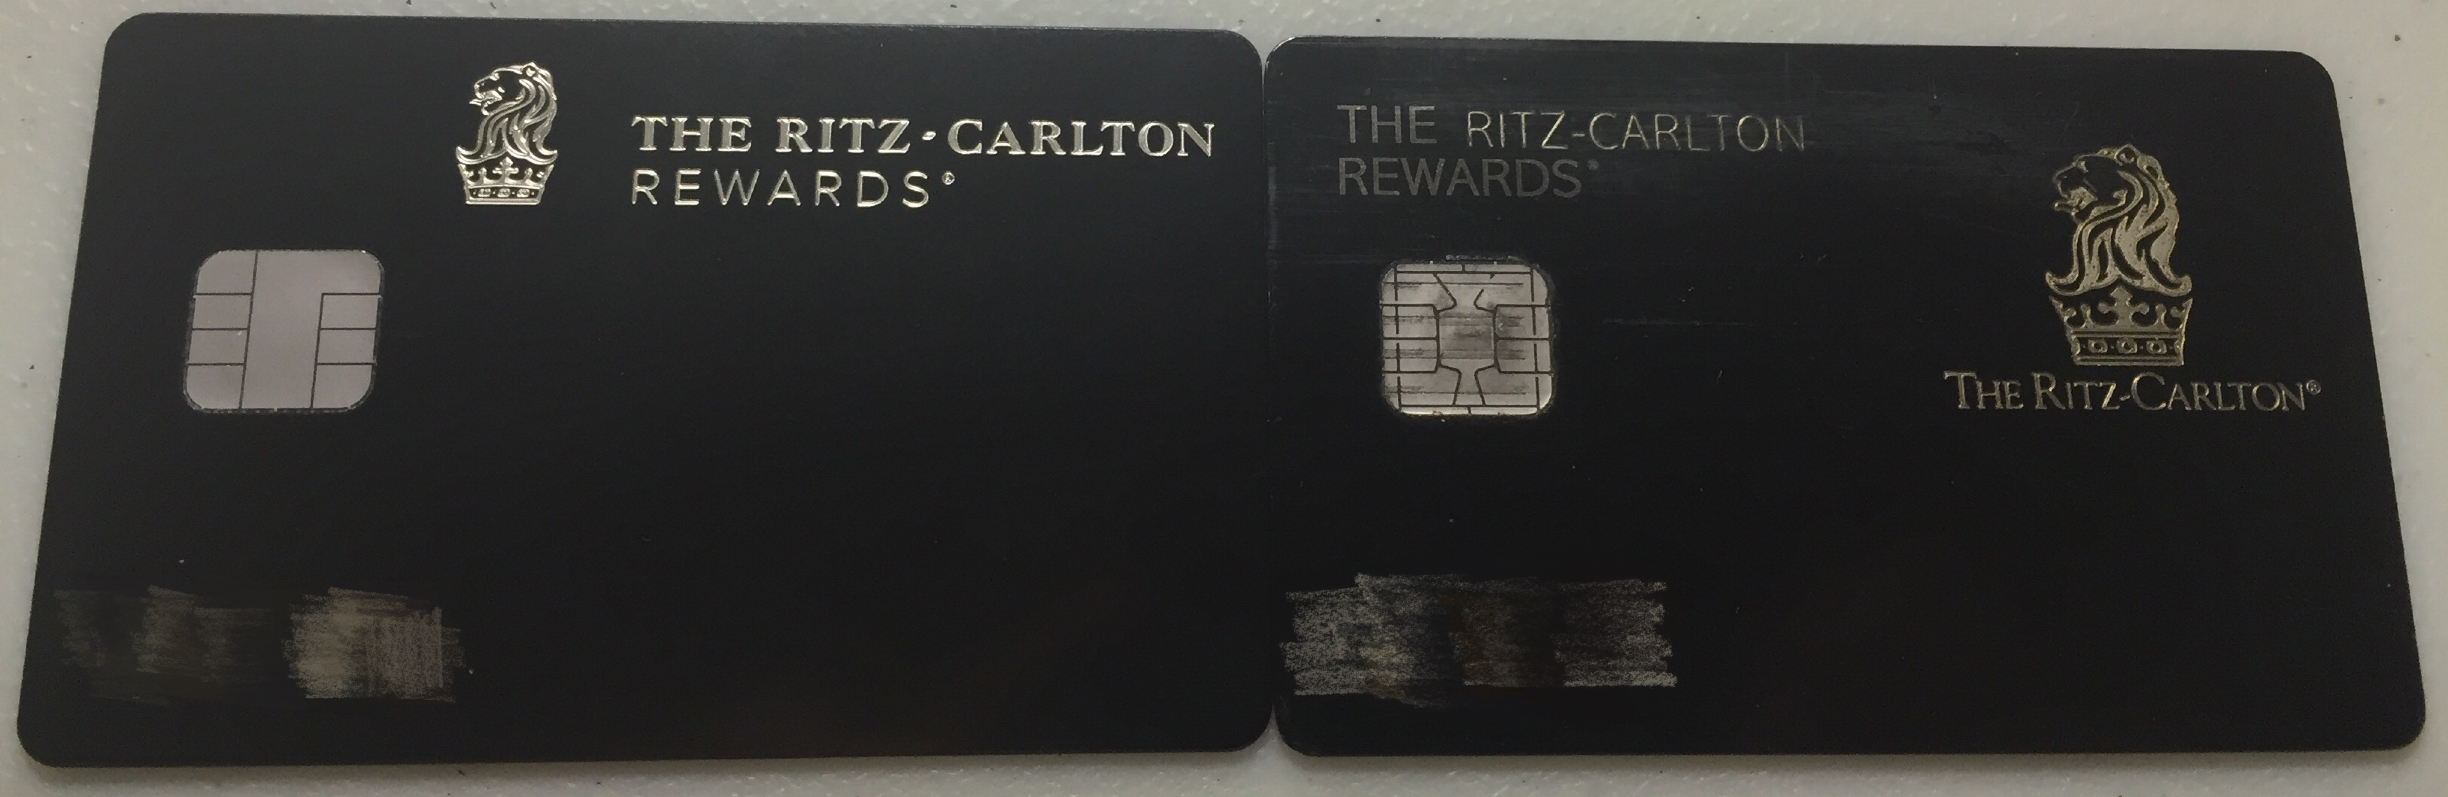 ritz-card-old-and-new-front